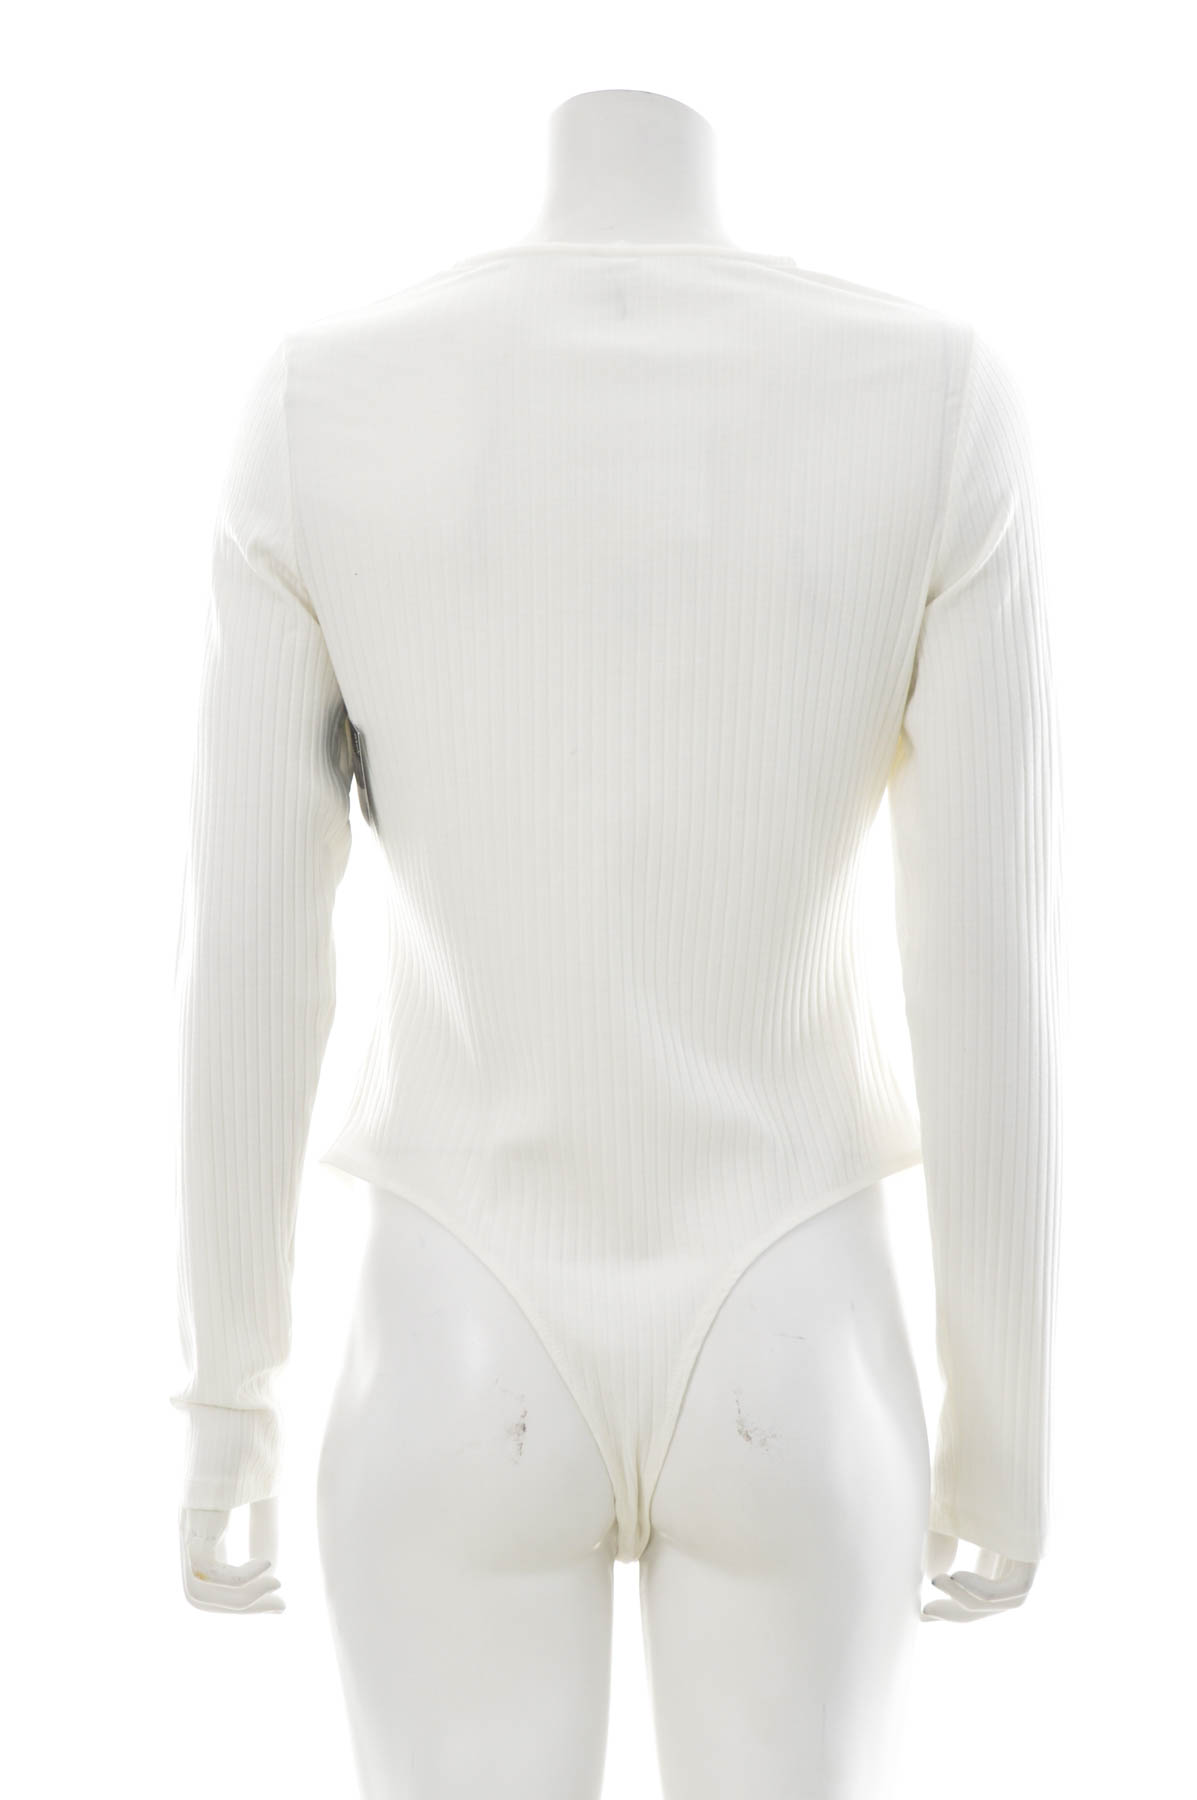 Woman's bodysuit - NLY Trend - 1